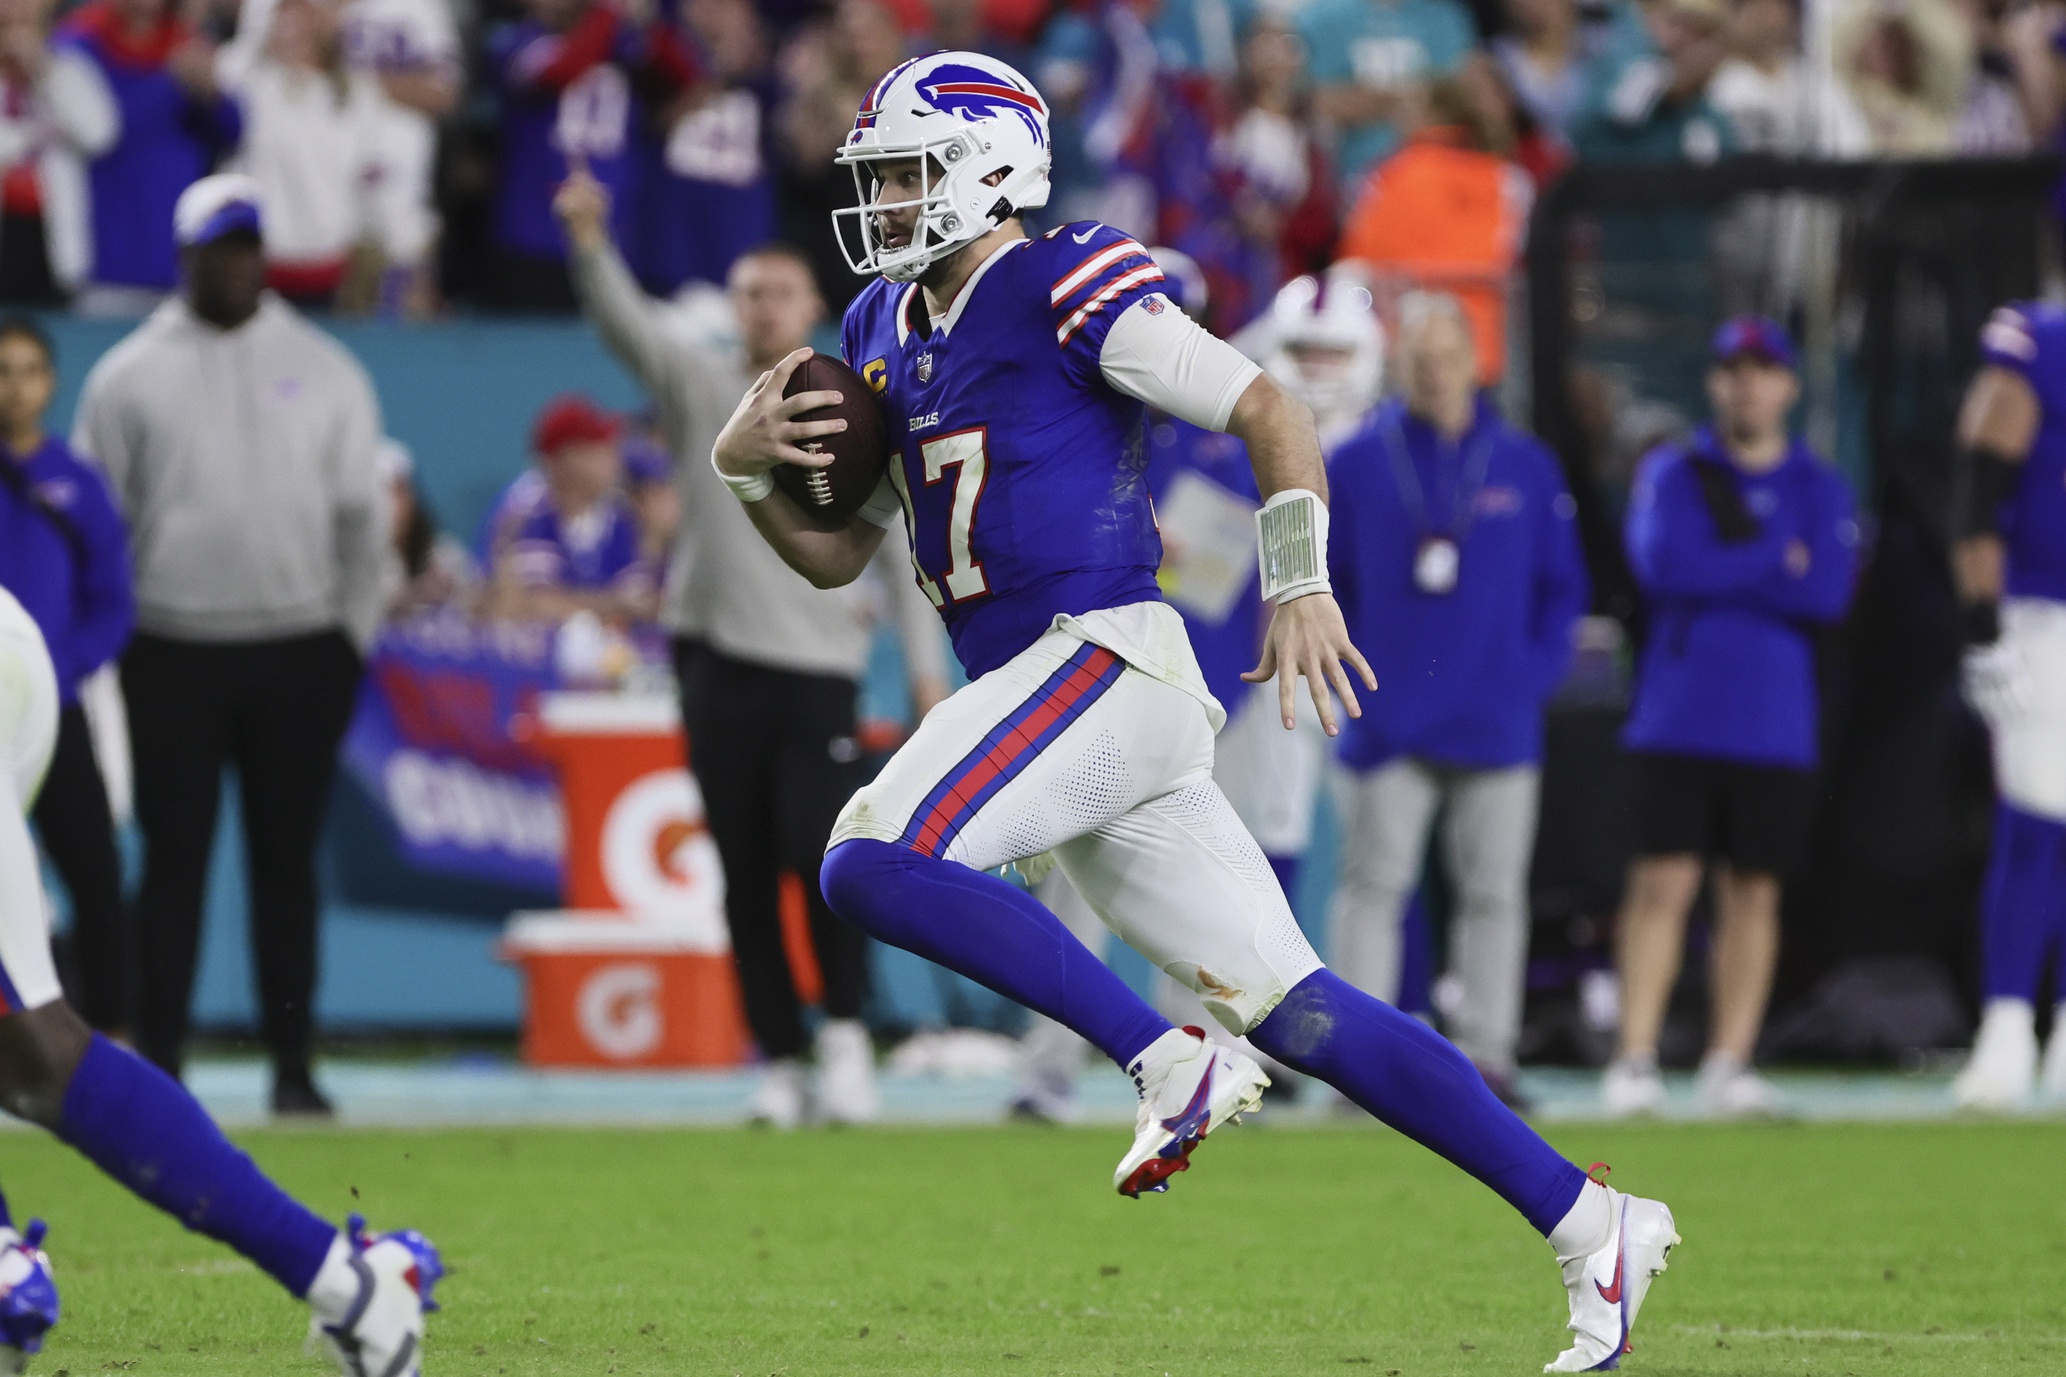 Buffalo Bills quarterback Josh Allen used his legs and his arms to lead Buffalo past Miami for the AFC East title in Week 18.